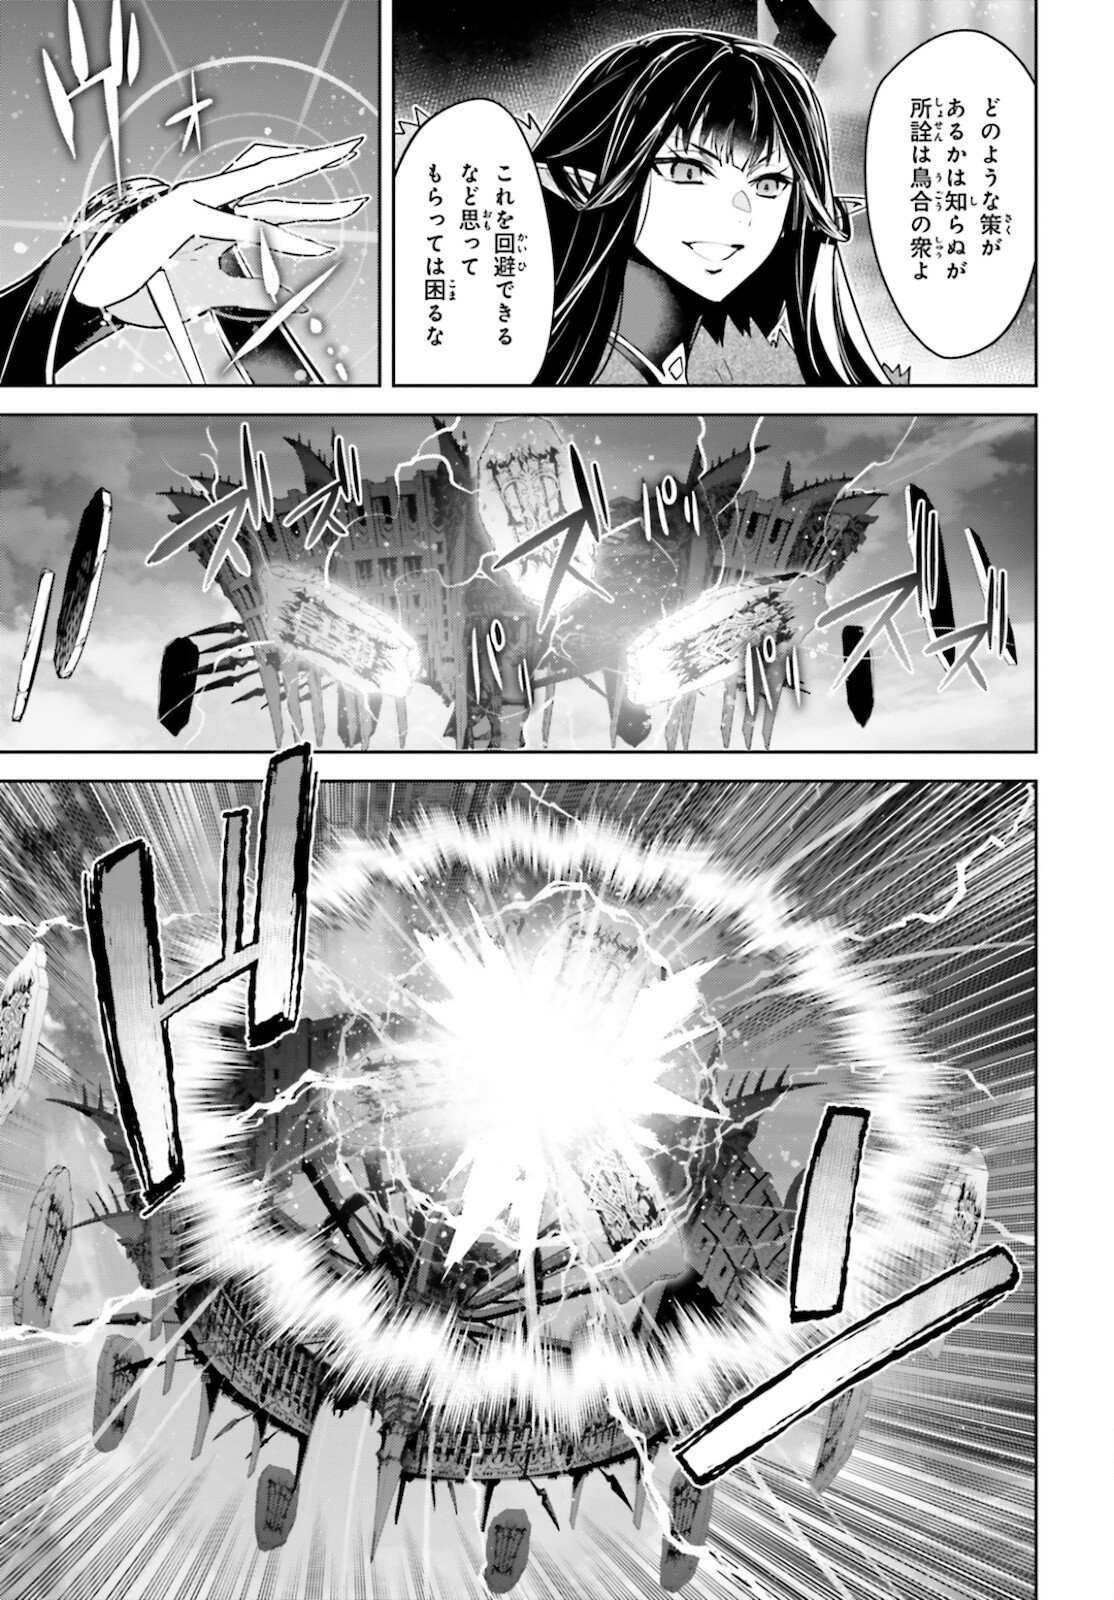 Fate-Apocrypha - Chapter 55-2 - Page 6